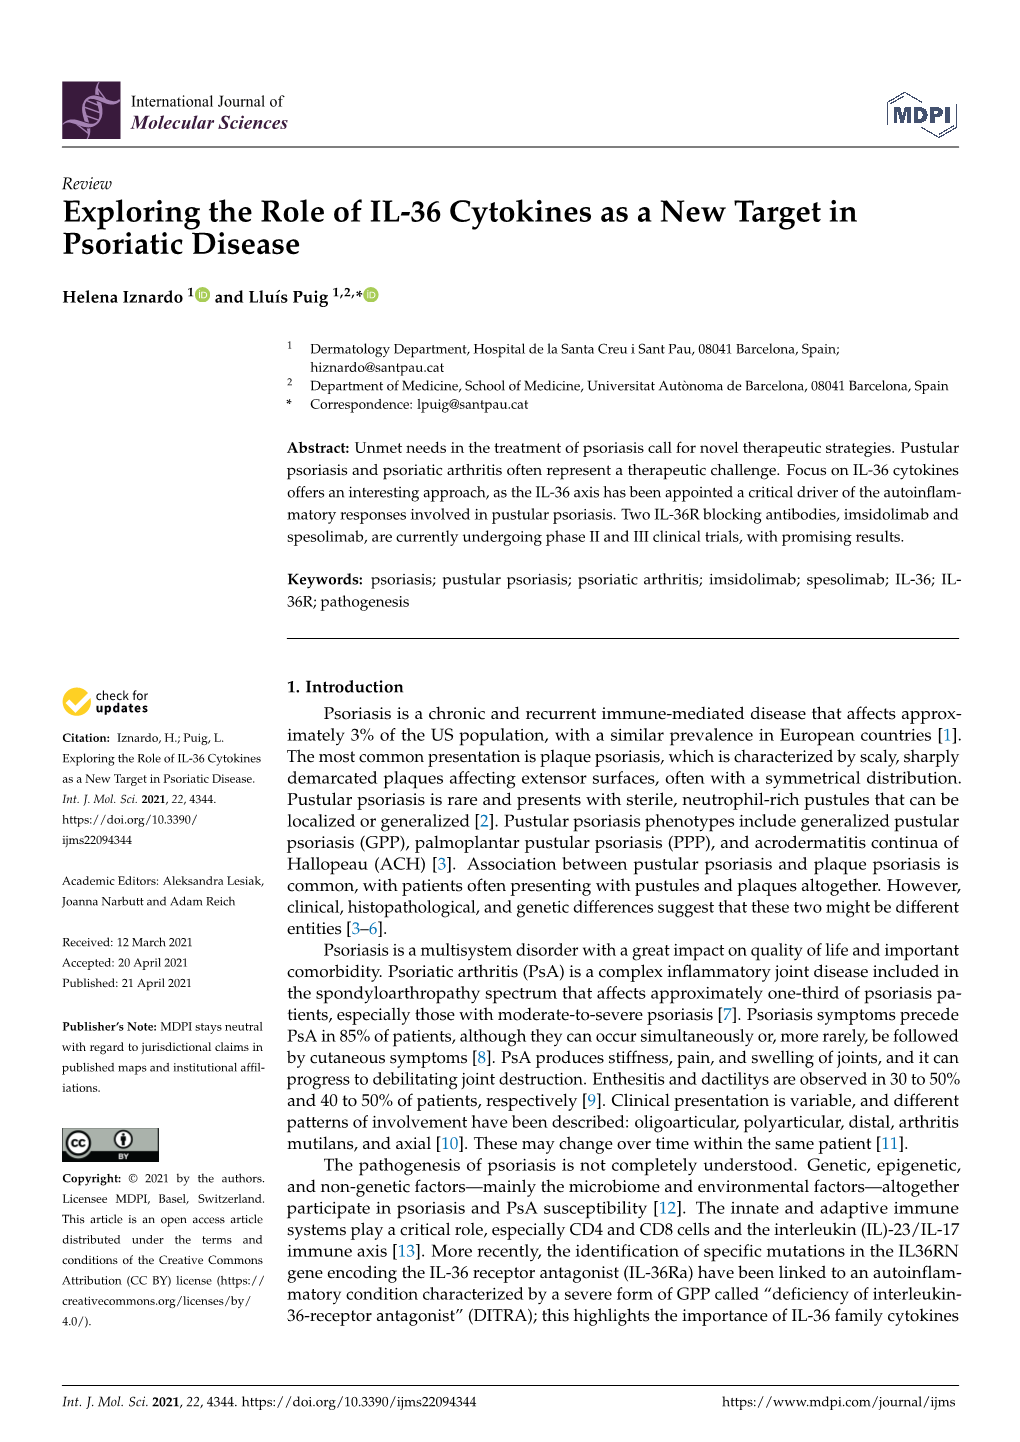 Exploring the Role of IL-36 Cytokines As a New Target in Psoriatic Disease